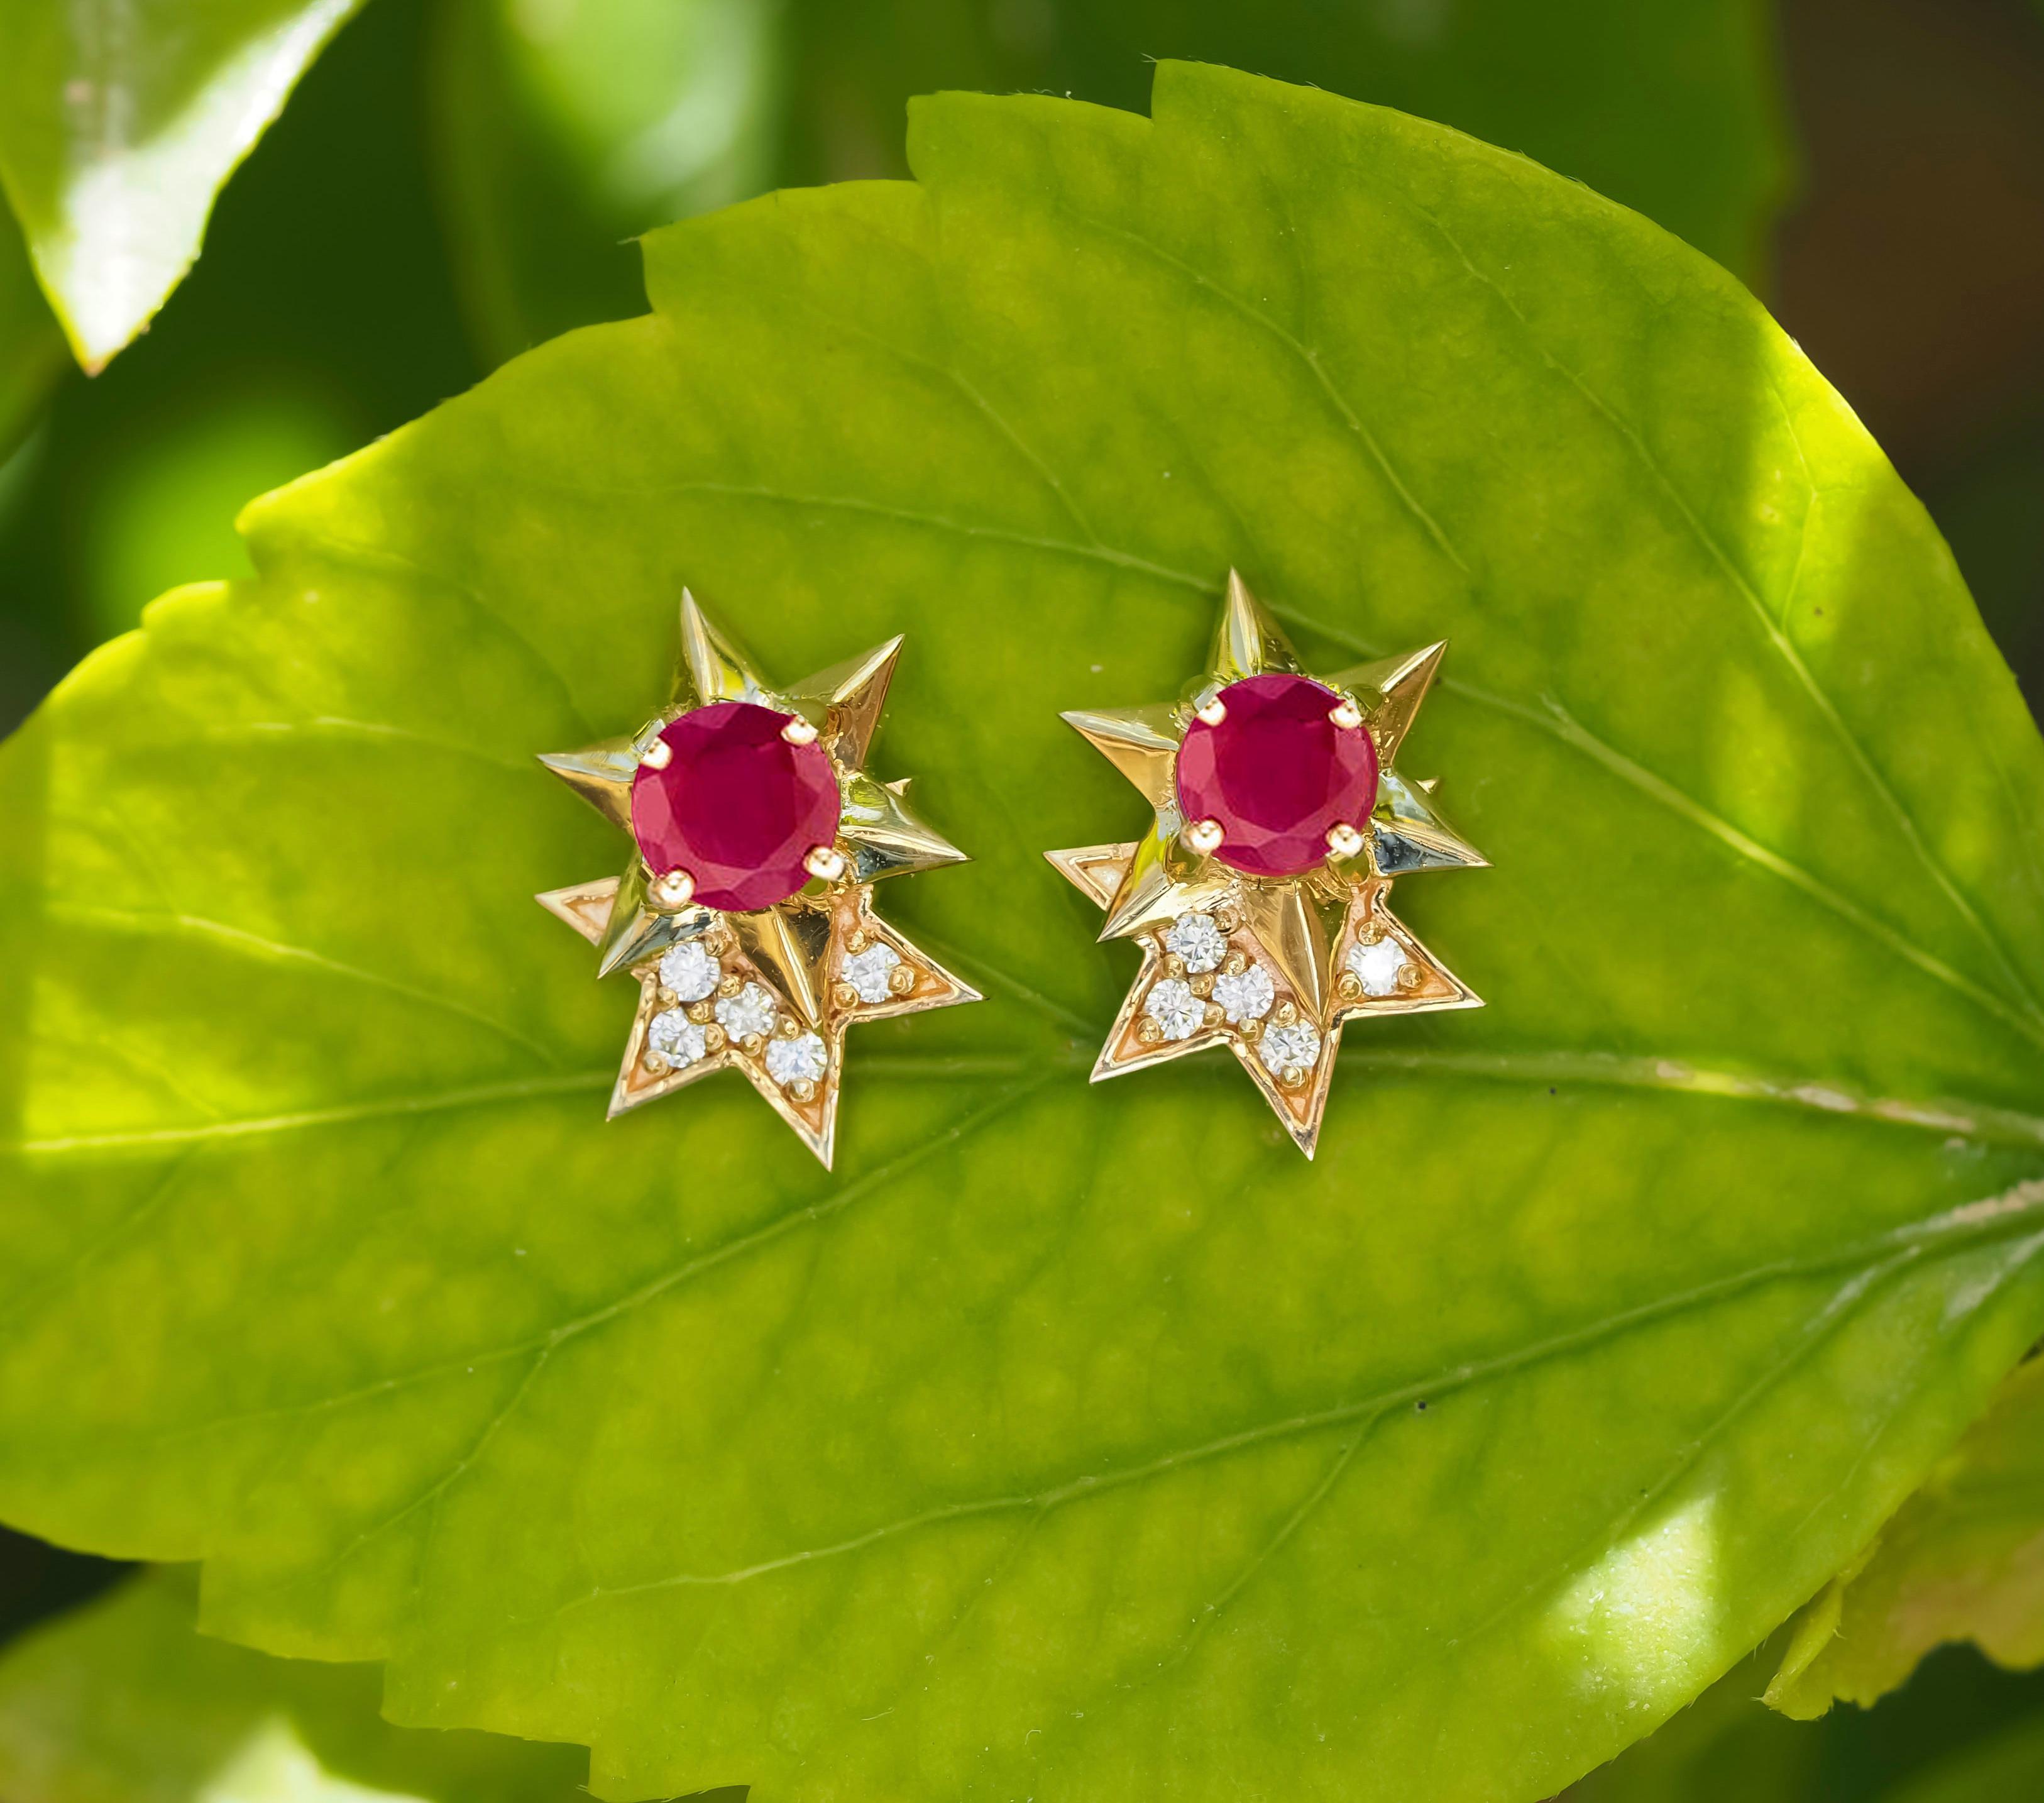 14 karat gold earrings studs with genuine rubies and diamonds. July birthstone.
Metal: 14 karat gold
Weight: 1.95 g.
Size: 12 x 9.5 mm.
Central stones: 
Genuine rubies: weight - 0.45 ct x 2 = 0.90 ct total.
Ruby color, round cut, clarity good -